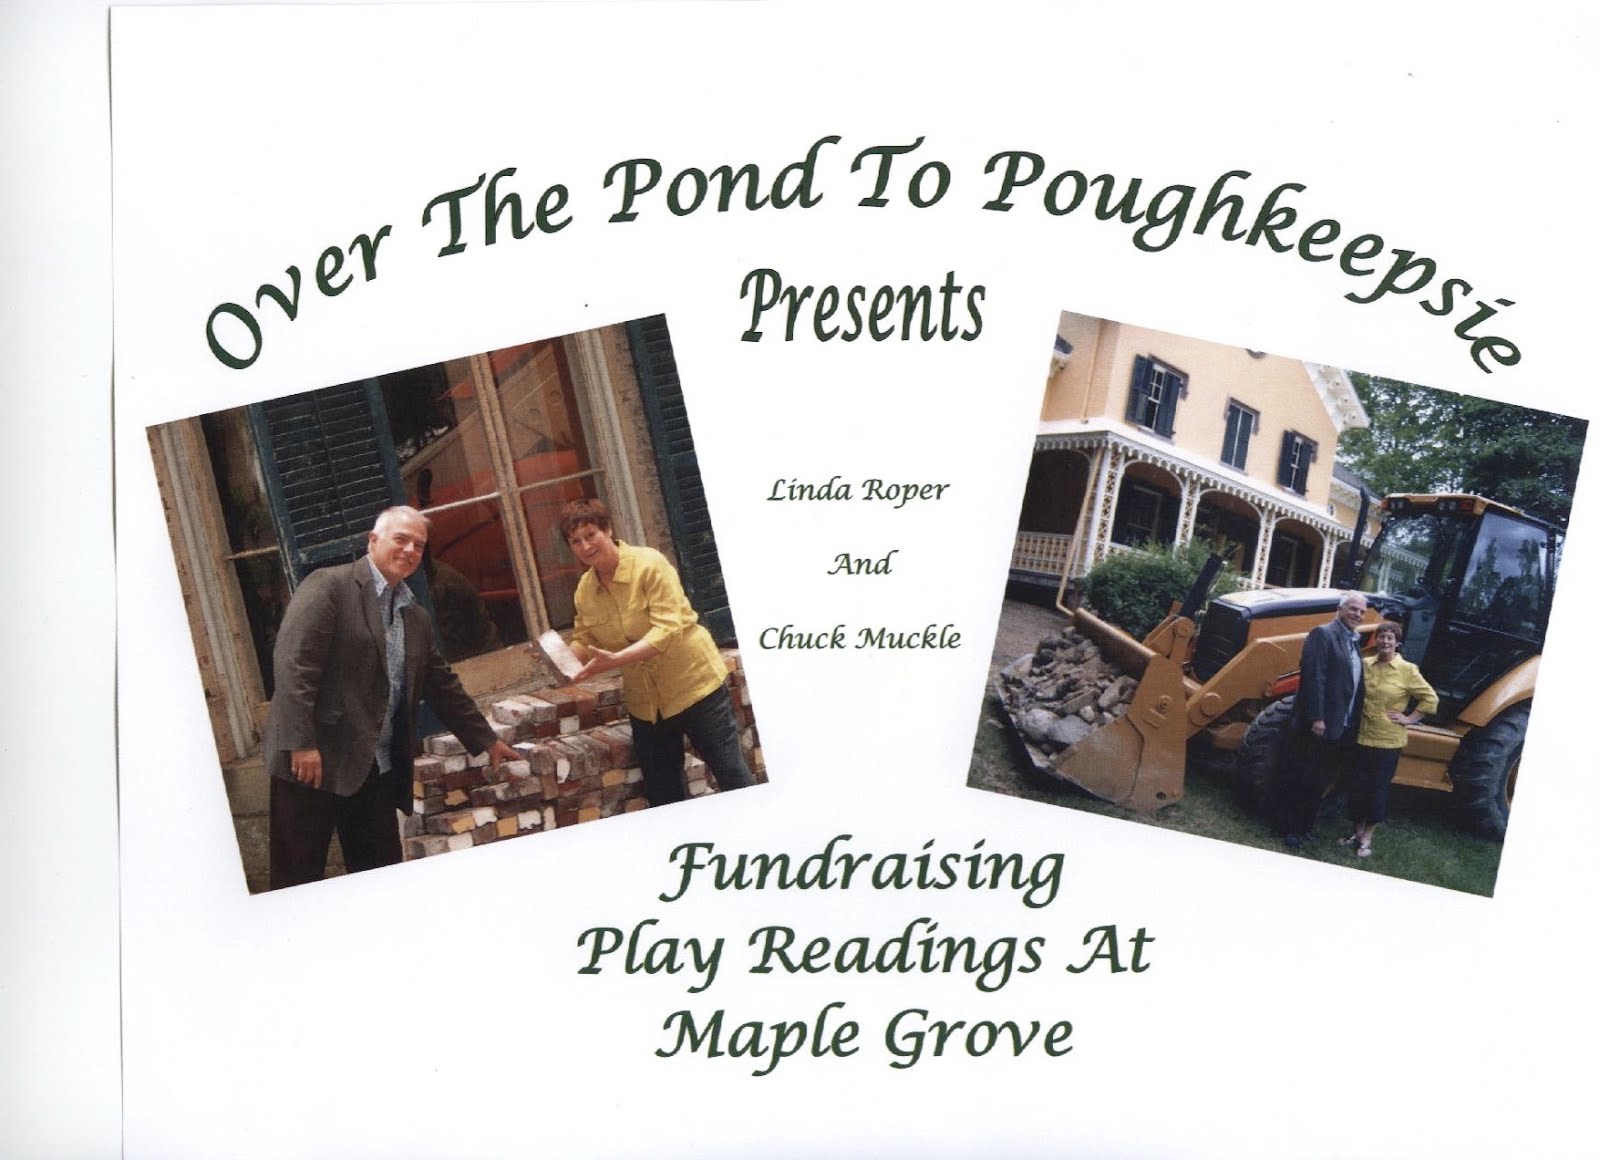 Ask me about Play Reading fundraisers for historic houses!